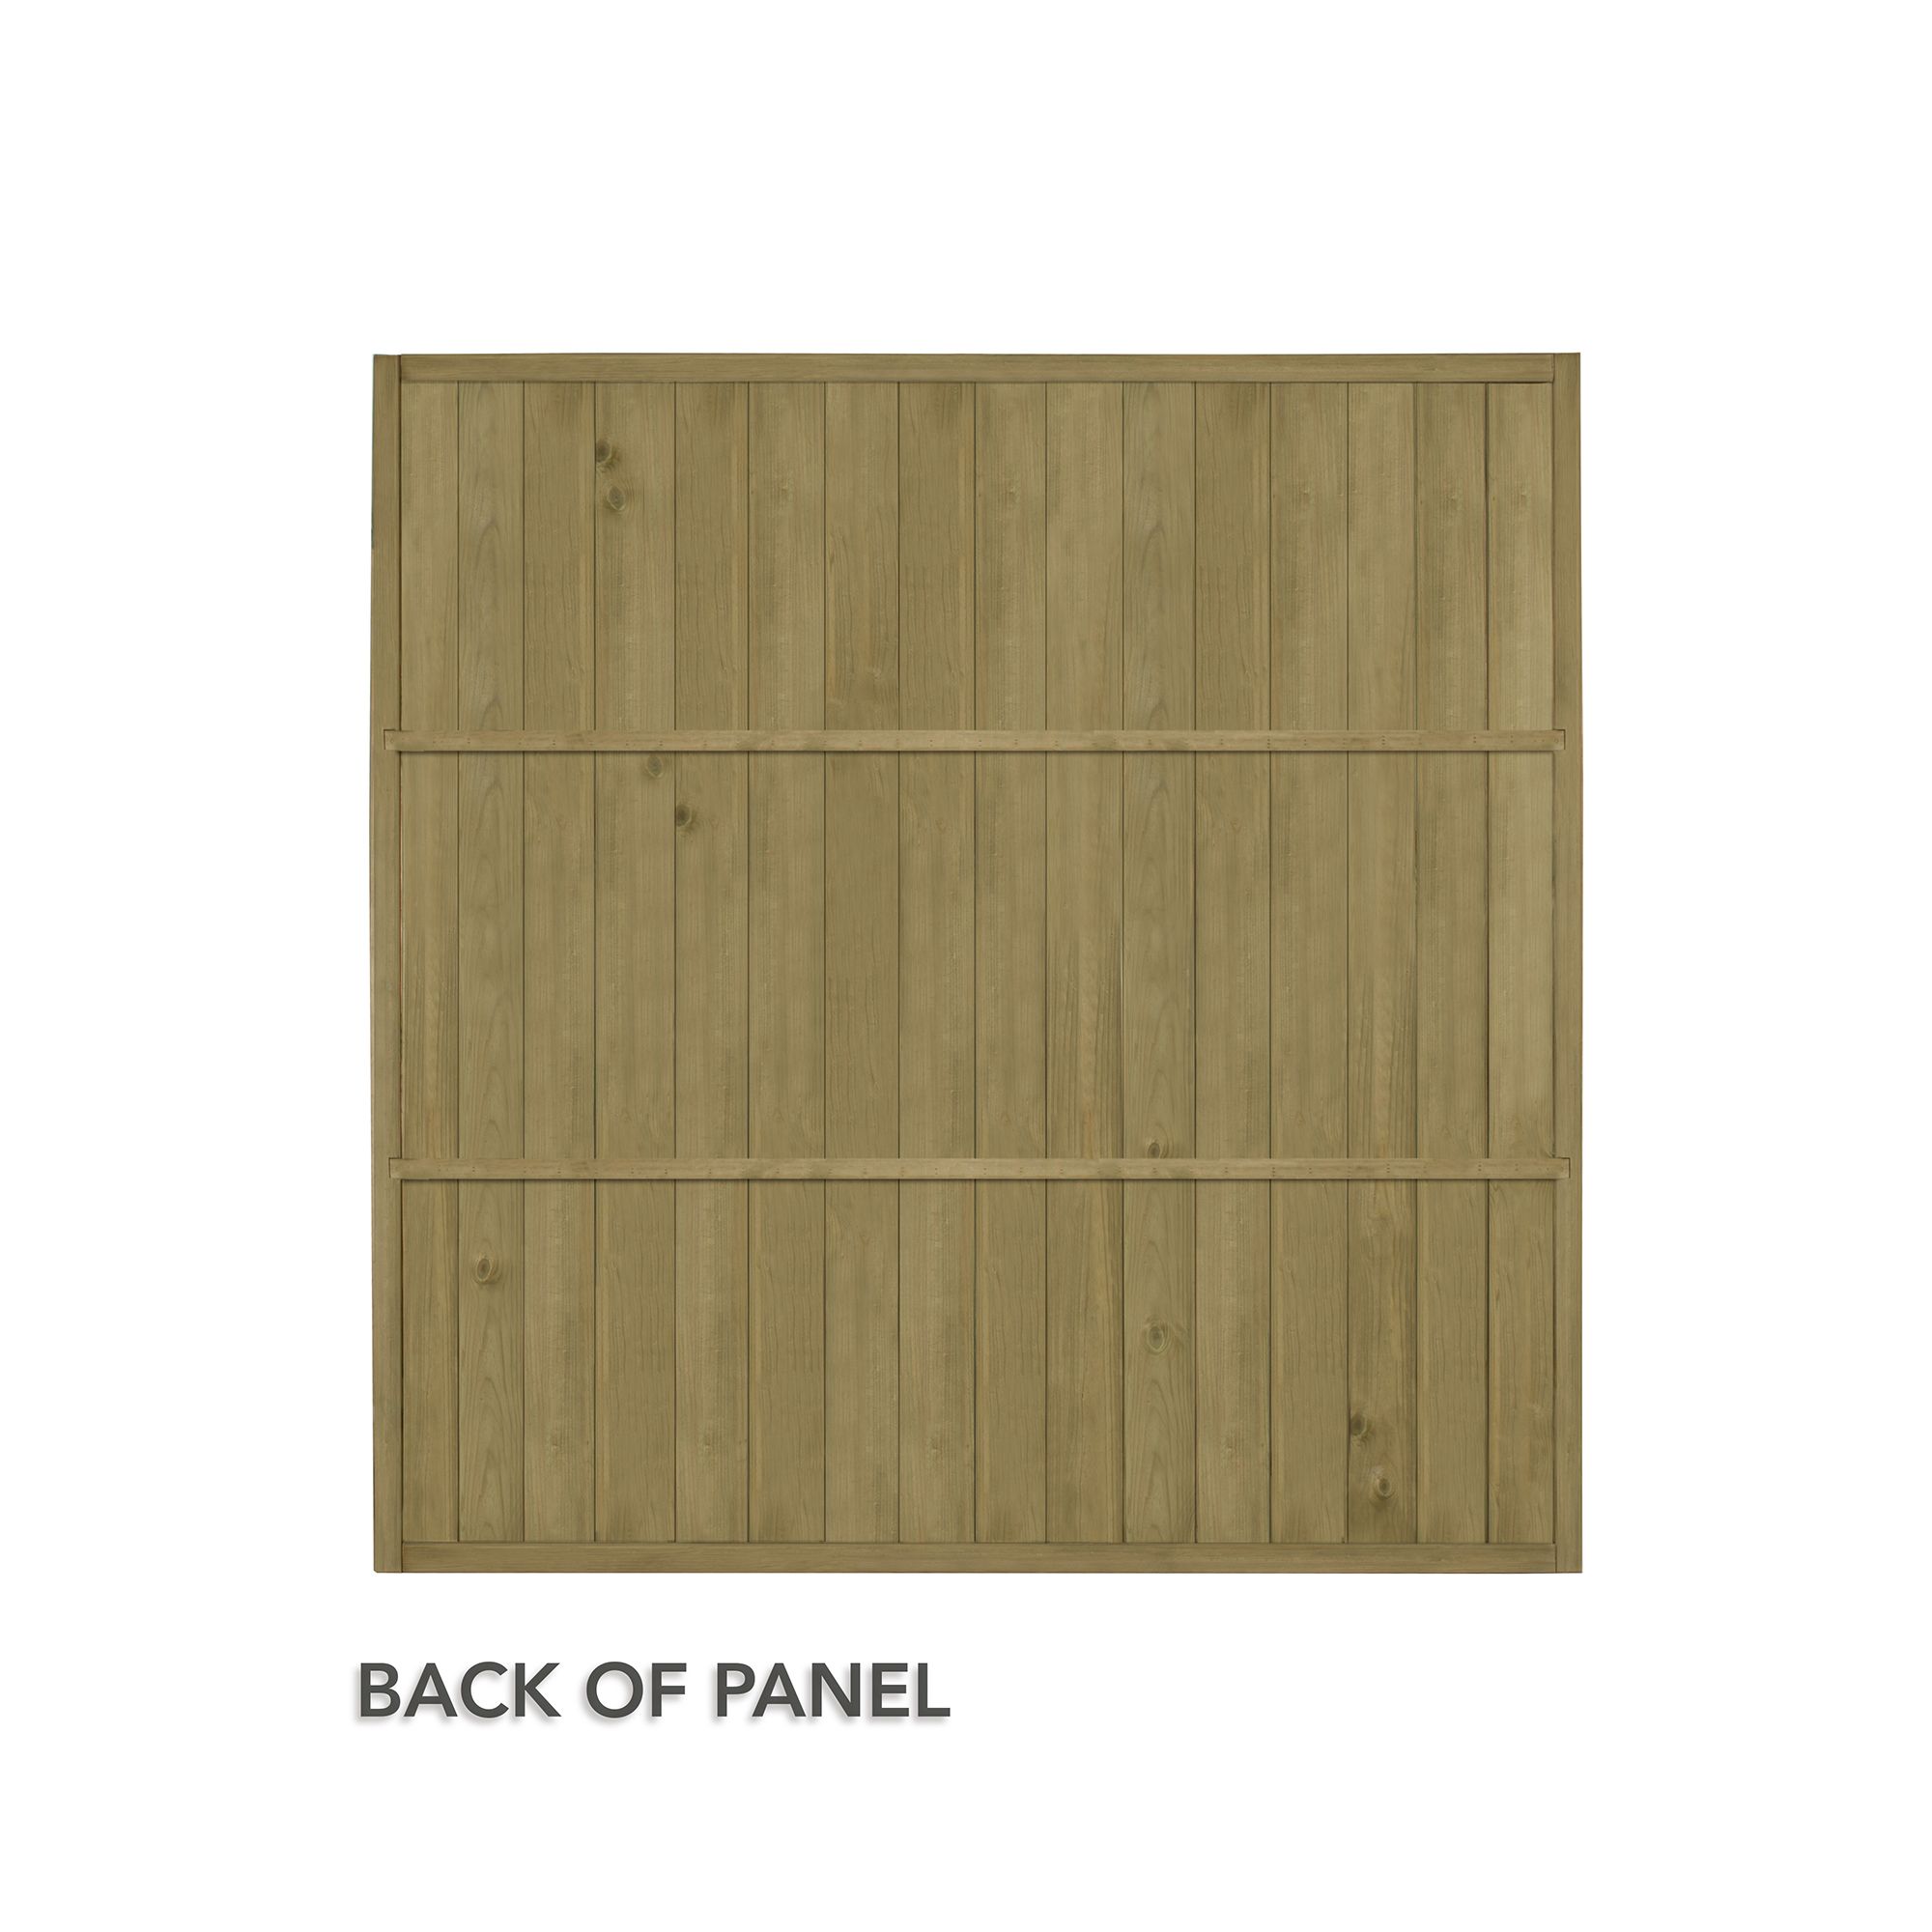 Forest Garden Traditional Tongue & groove 6ft Fence panel (W)1.83m (H)1.83m, Pack of 5